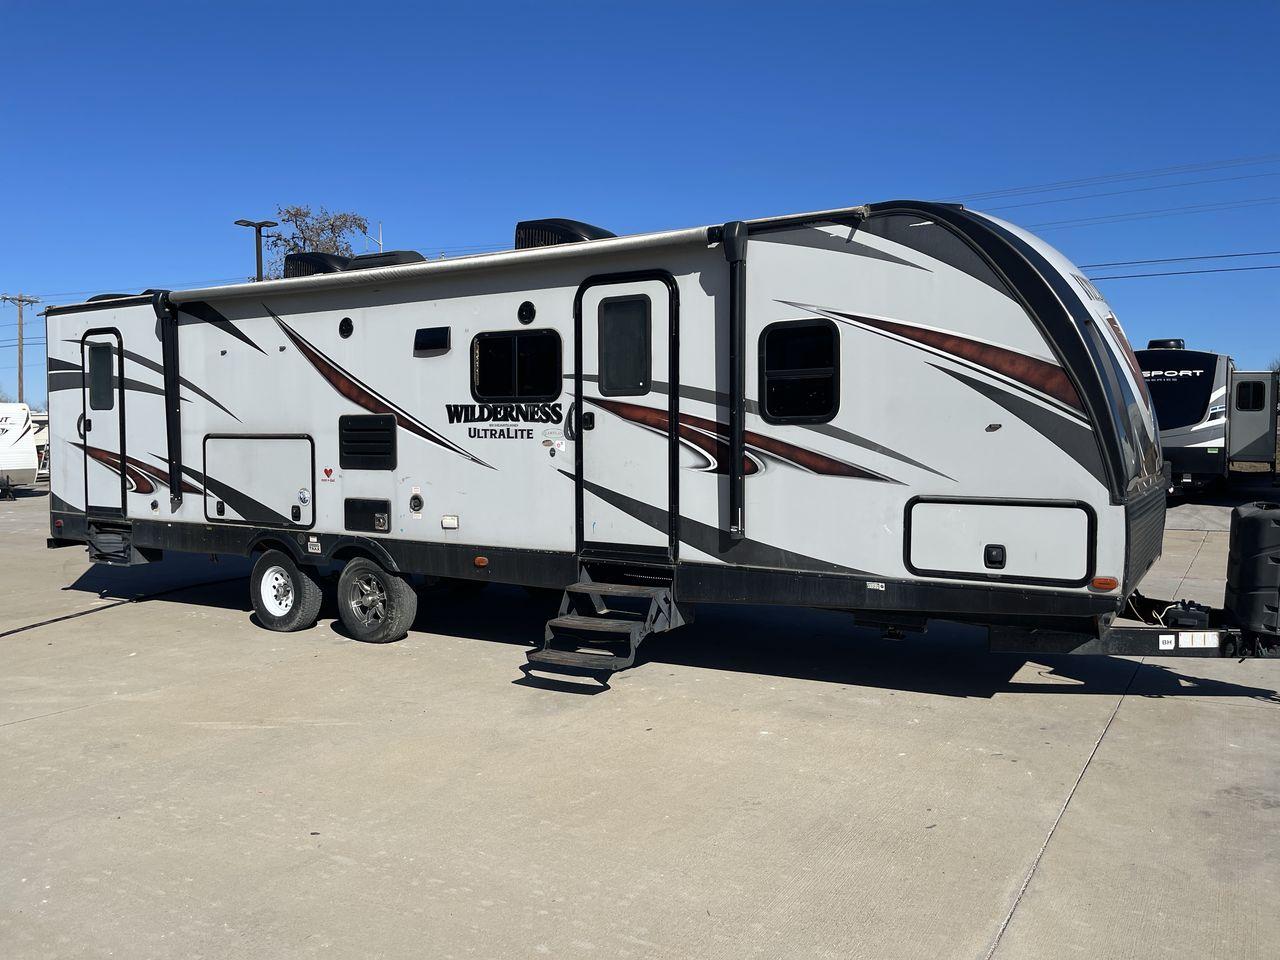 2018 GRAY HEARTLAND WILDERNESS USED 3125 (5SFNB3526JE) , Length: 35.75 ft. | Dry Weight: 6,840 lbs. | Gross Weight: 8,600 lbs. | Slides: 1 transmission, located at 4319 N Main St, Cleburne, TX, 76033, (817) 678-5133, 32.385960, -97.391212 - Discover your inner adventurer with the Heartland Wilderness 3125 travel trailer from 2018. This RV offers the ideal balance of roomy living, contemporary conveniences, and tough sturdiness for your outdoor adventures. It is designed for individuals who desire both comfort and exploration. The dimen - Photo #22